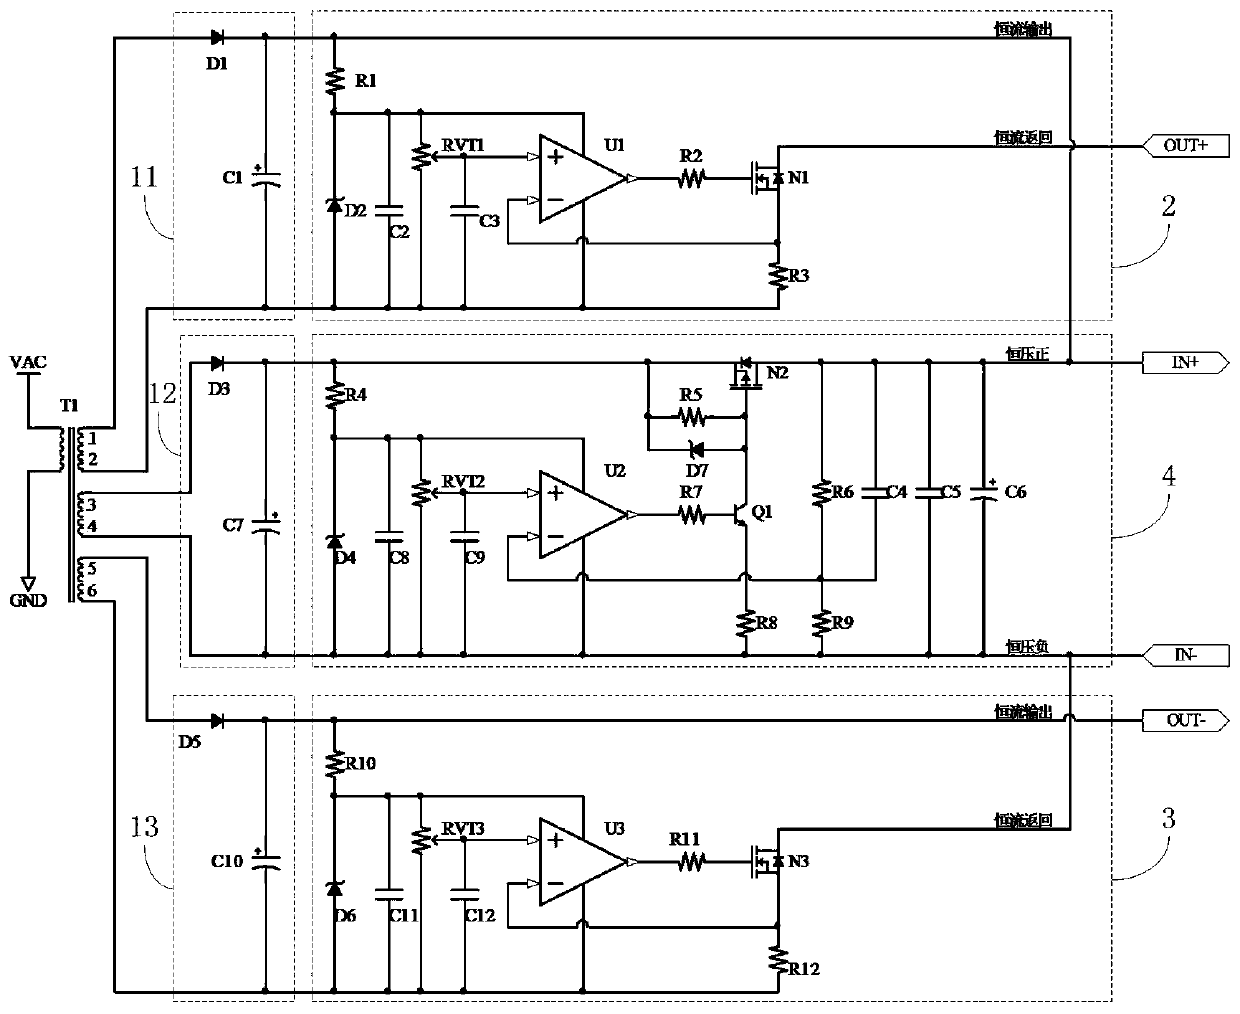 Circuit for aging direct-current passive EMI filter